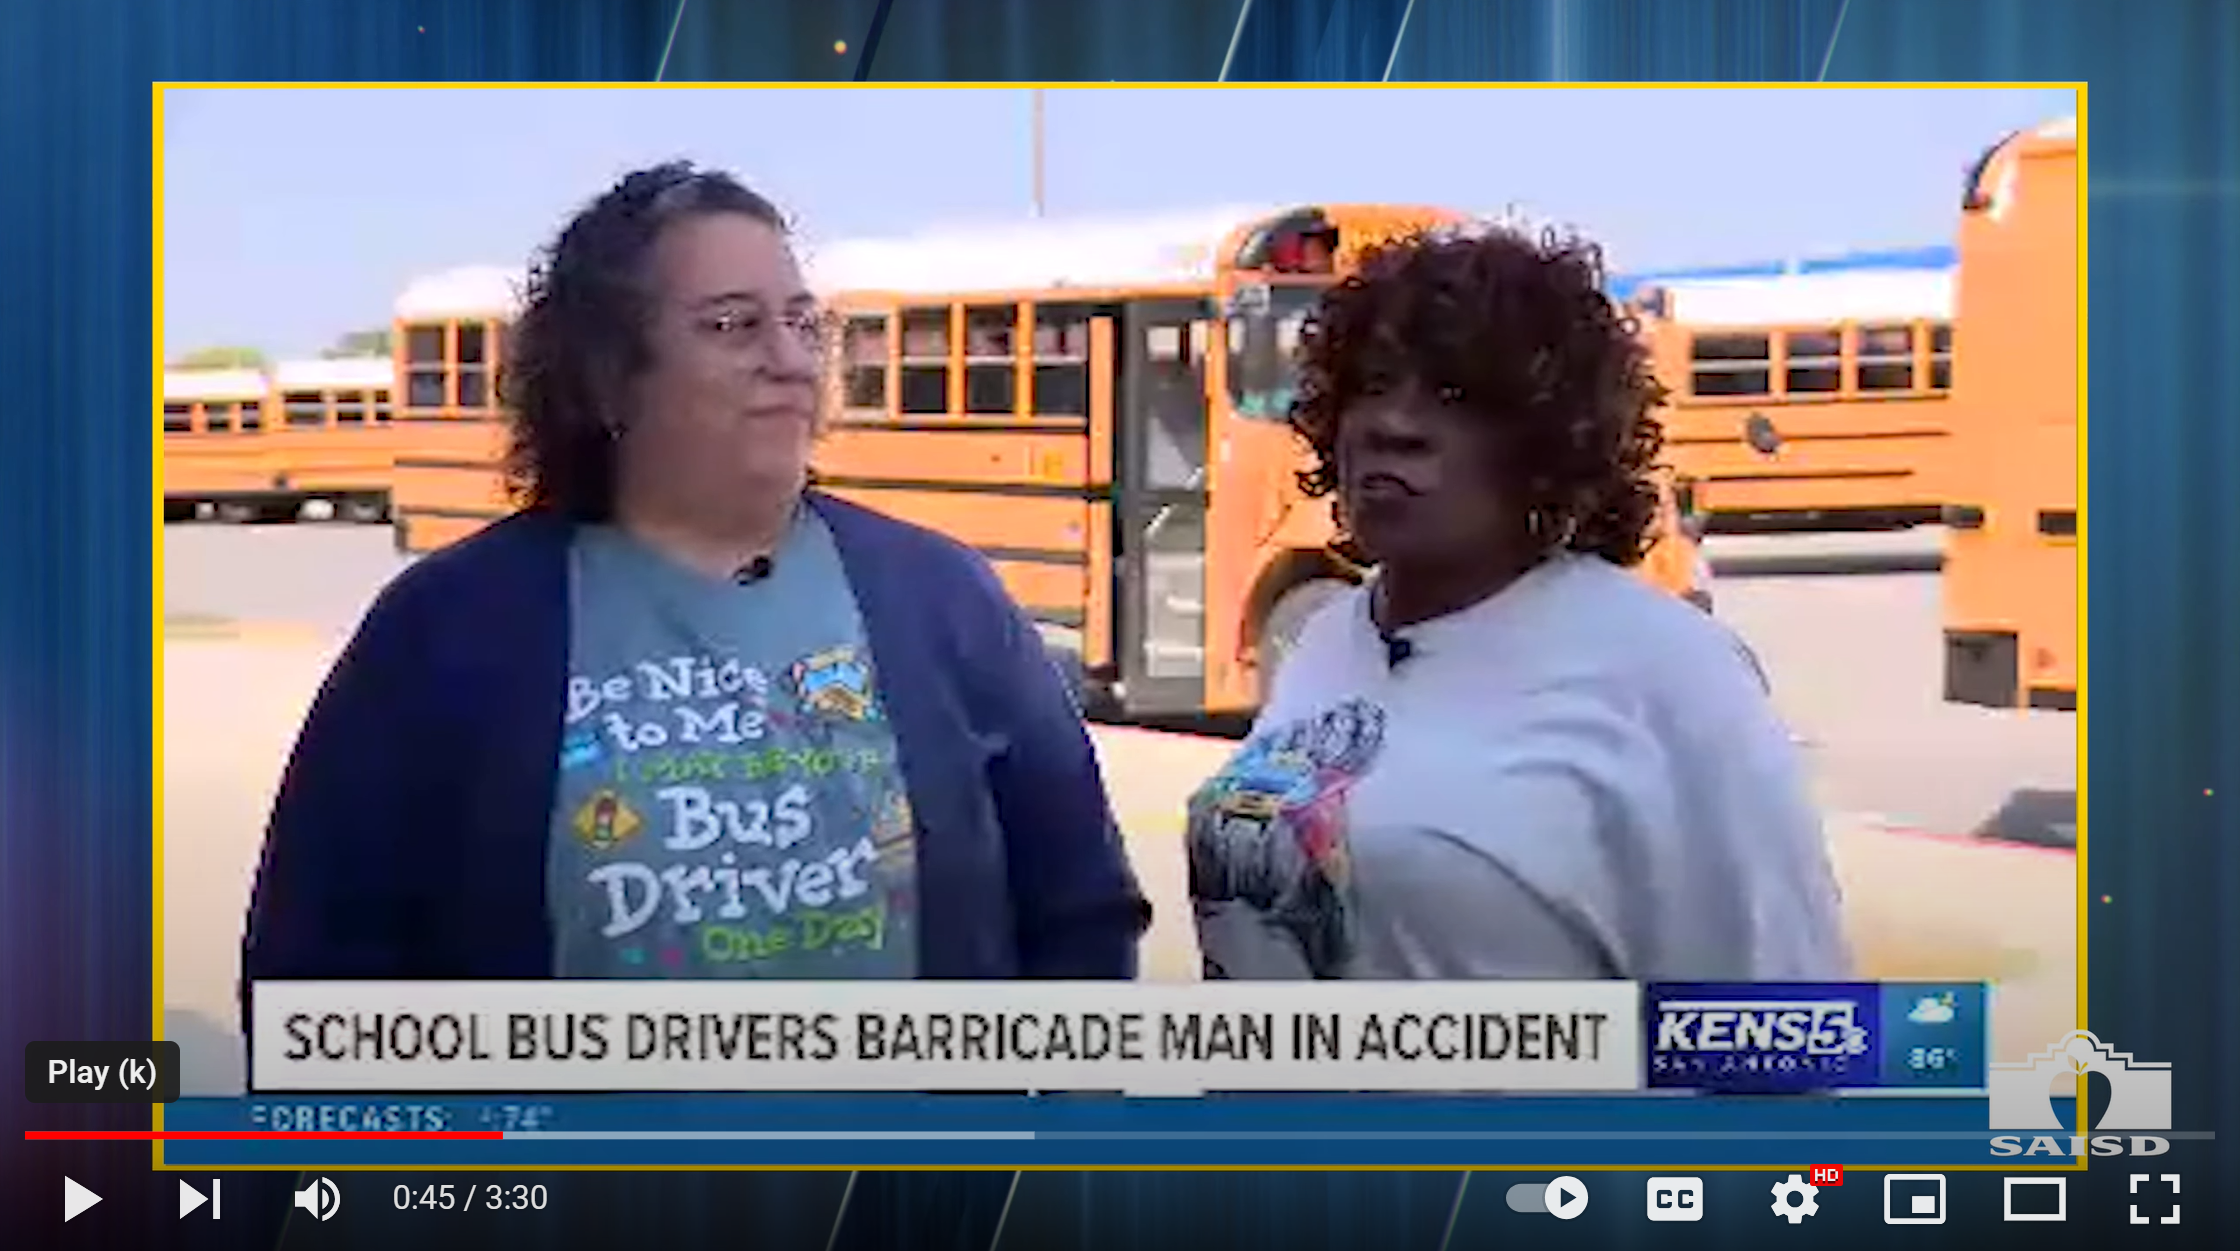 bus drivers